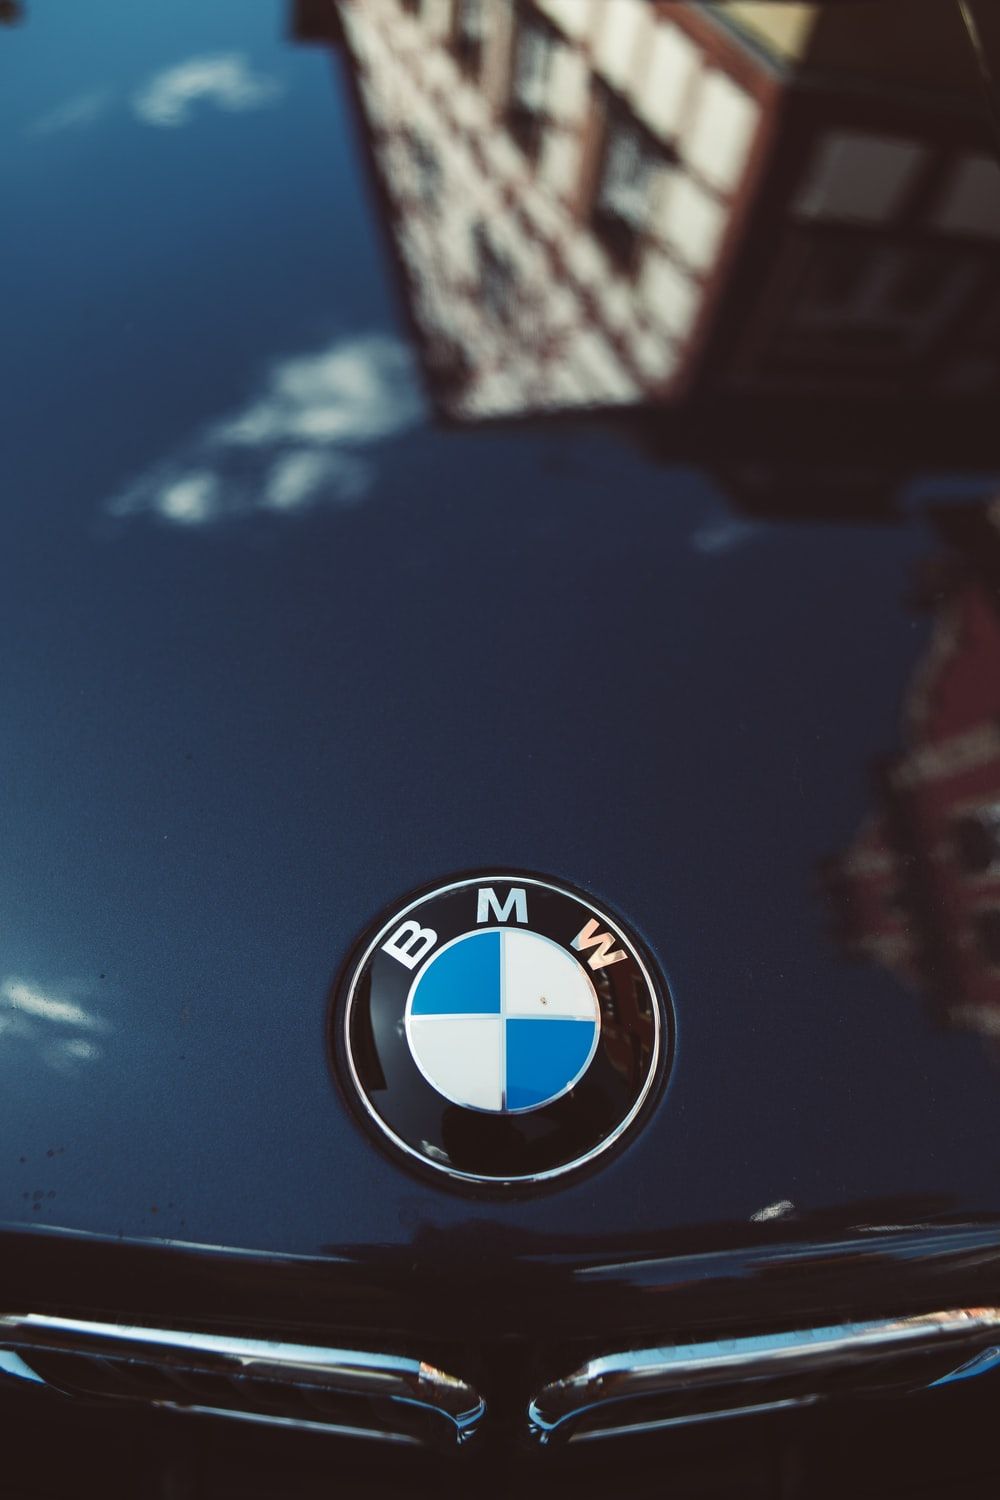 Classic Bmw Picture. Download Free Image